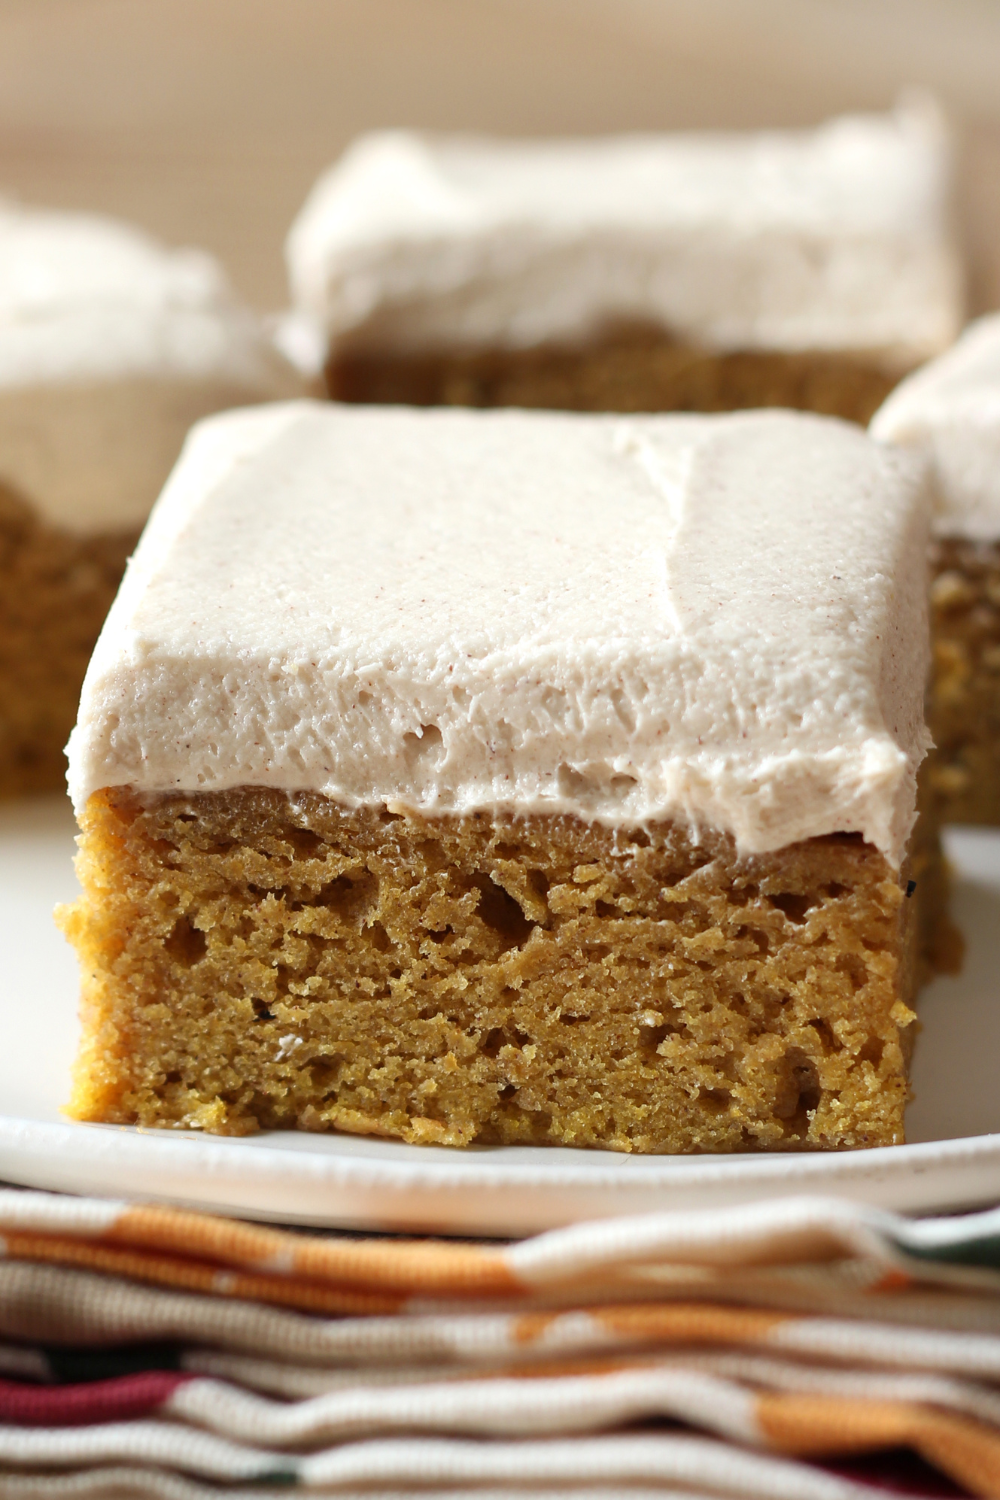 a close-up photo of a slice of pumpkin bar with brown sugar frosting sitting on a plate, with more bars behind